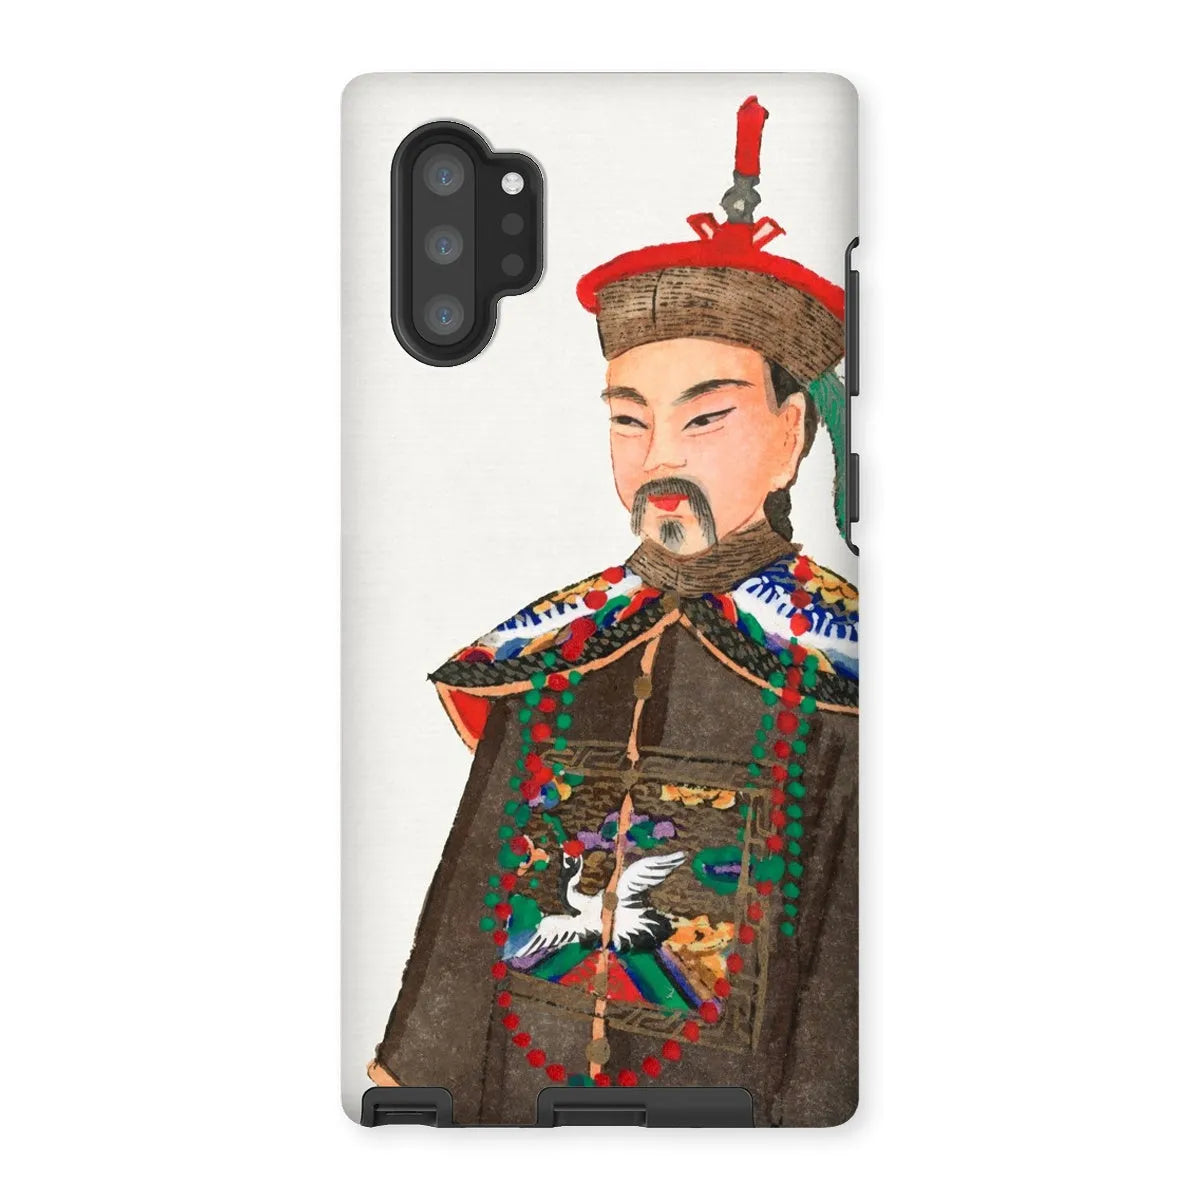 Nobleman At Court - Chinese Aesthetic Manchu Art Phone Case - Samsung Galaxy Note 10p / Matte - Mobile Phone Cases